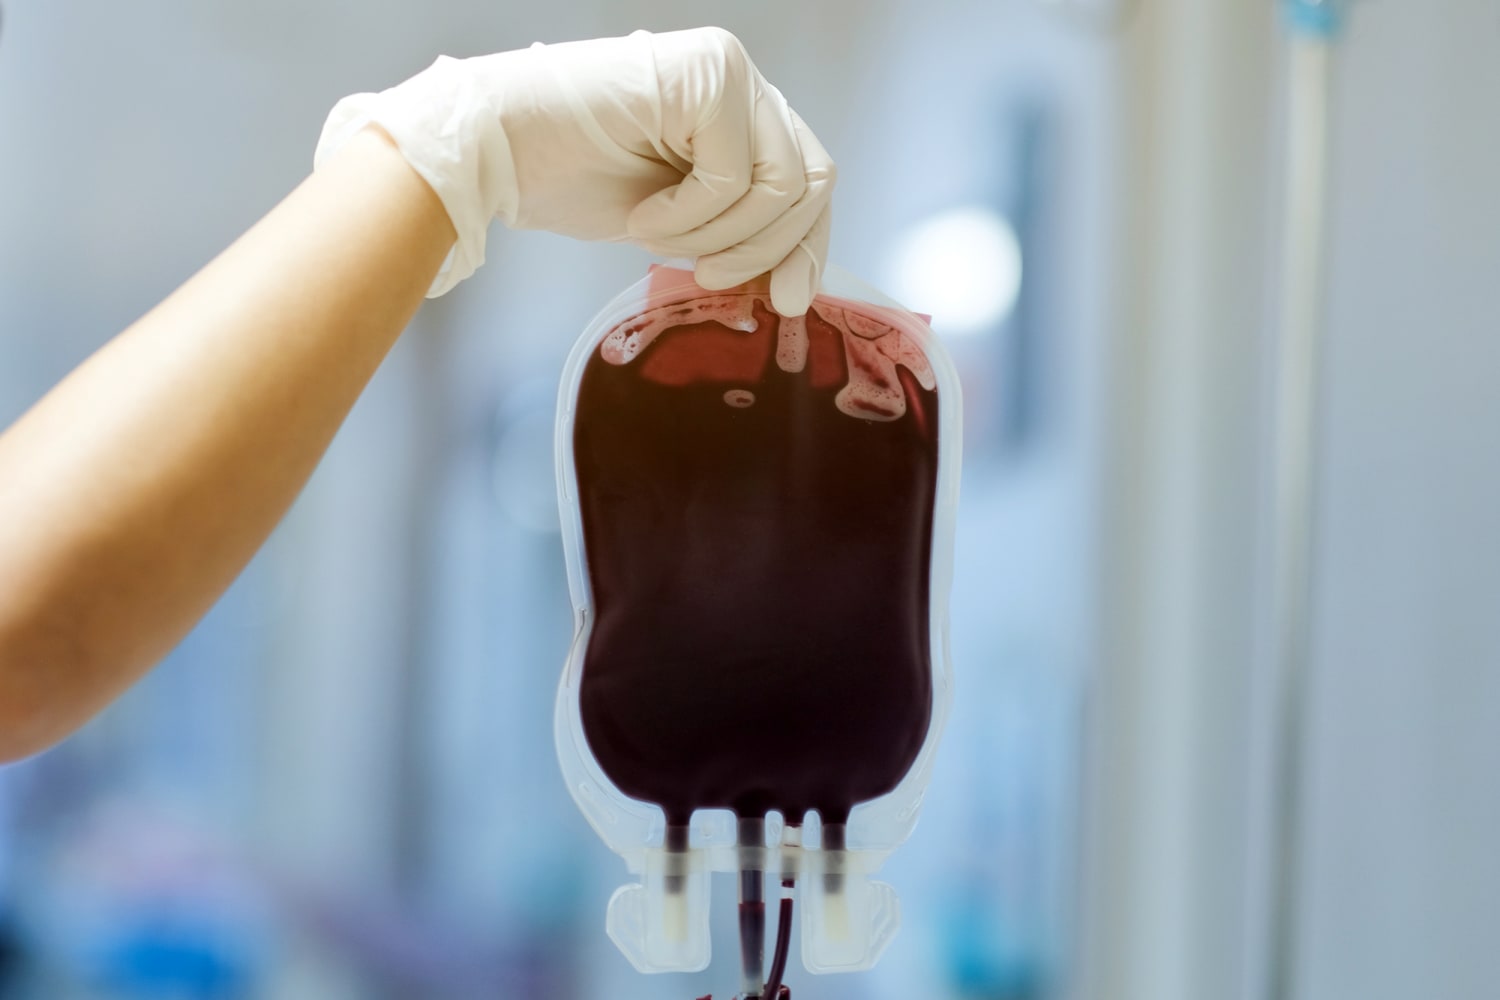 Critics call to end three-month celibacy requirement for gay, bisexual men amid blood shortage